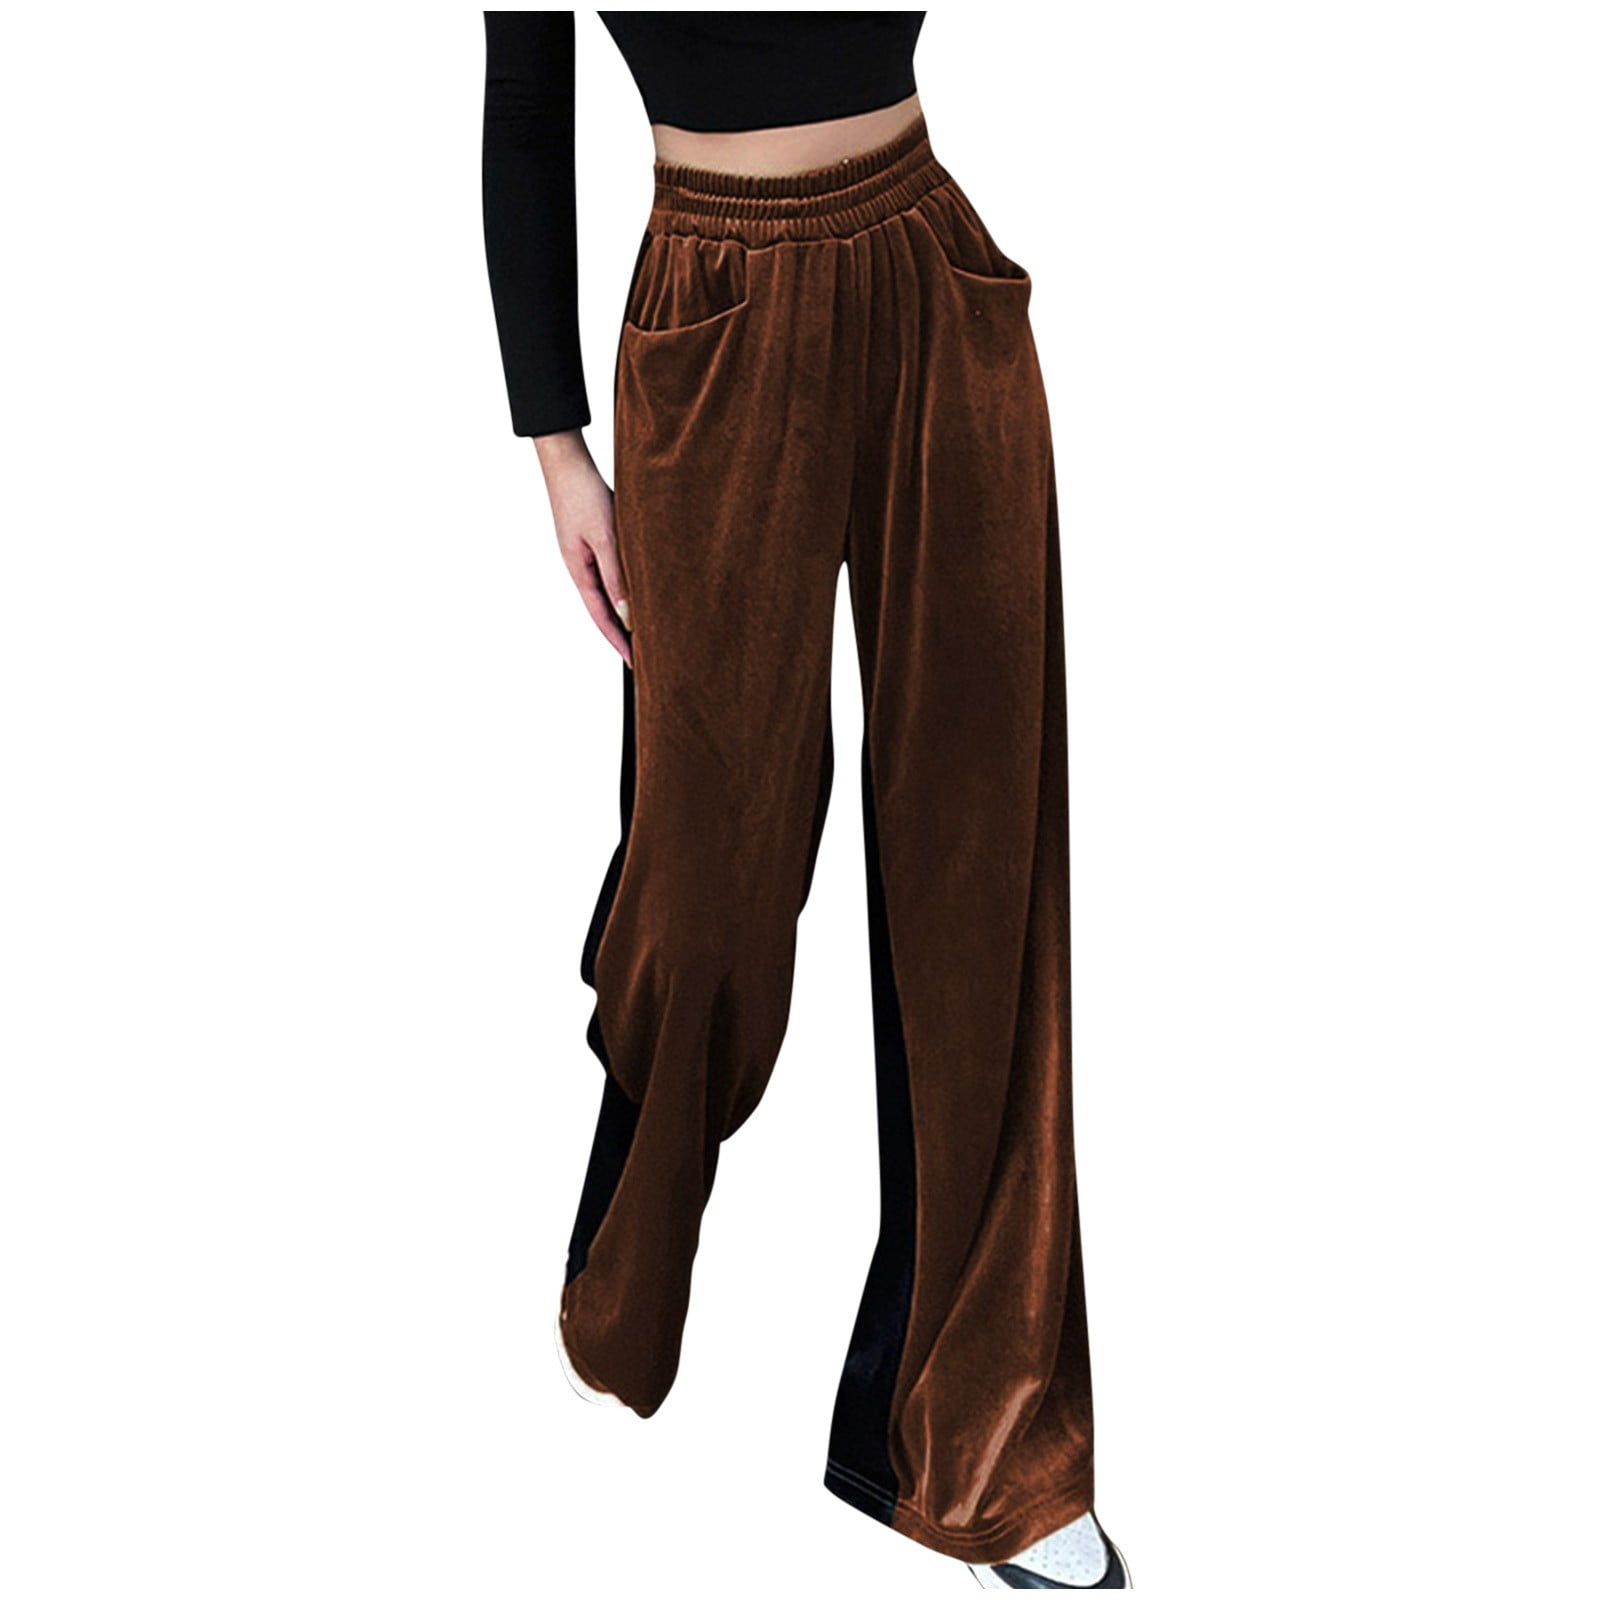 Wide Leg Trousers, Ladies Royal Blue Trousers Solid Color With Belt Pocket  Cropped Straight Pants Summer Baggy Wide Leg Trousers Elastic High Waist  Flares Pants For Women Office Work Leisure Beach P :